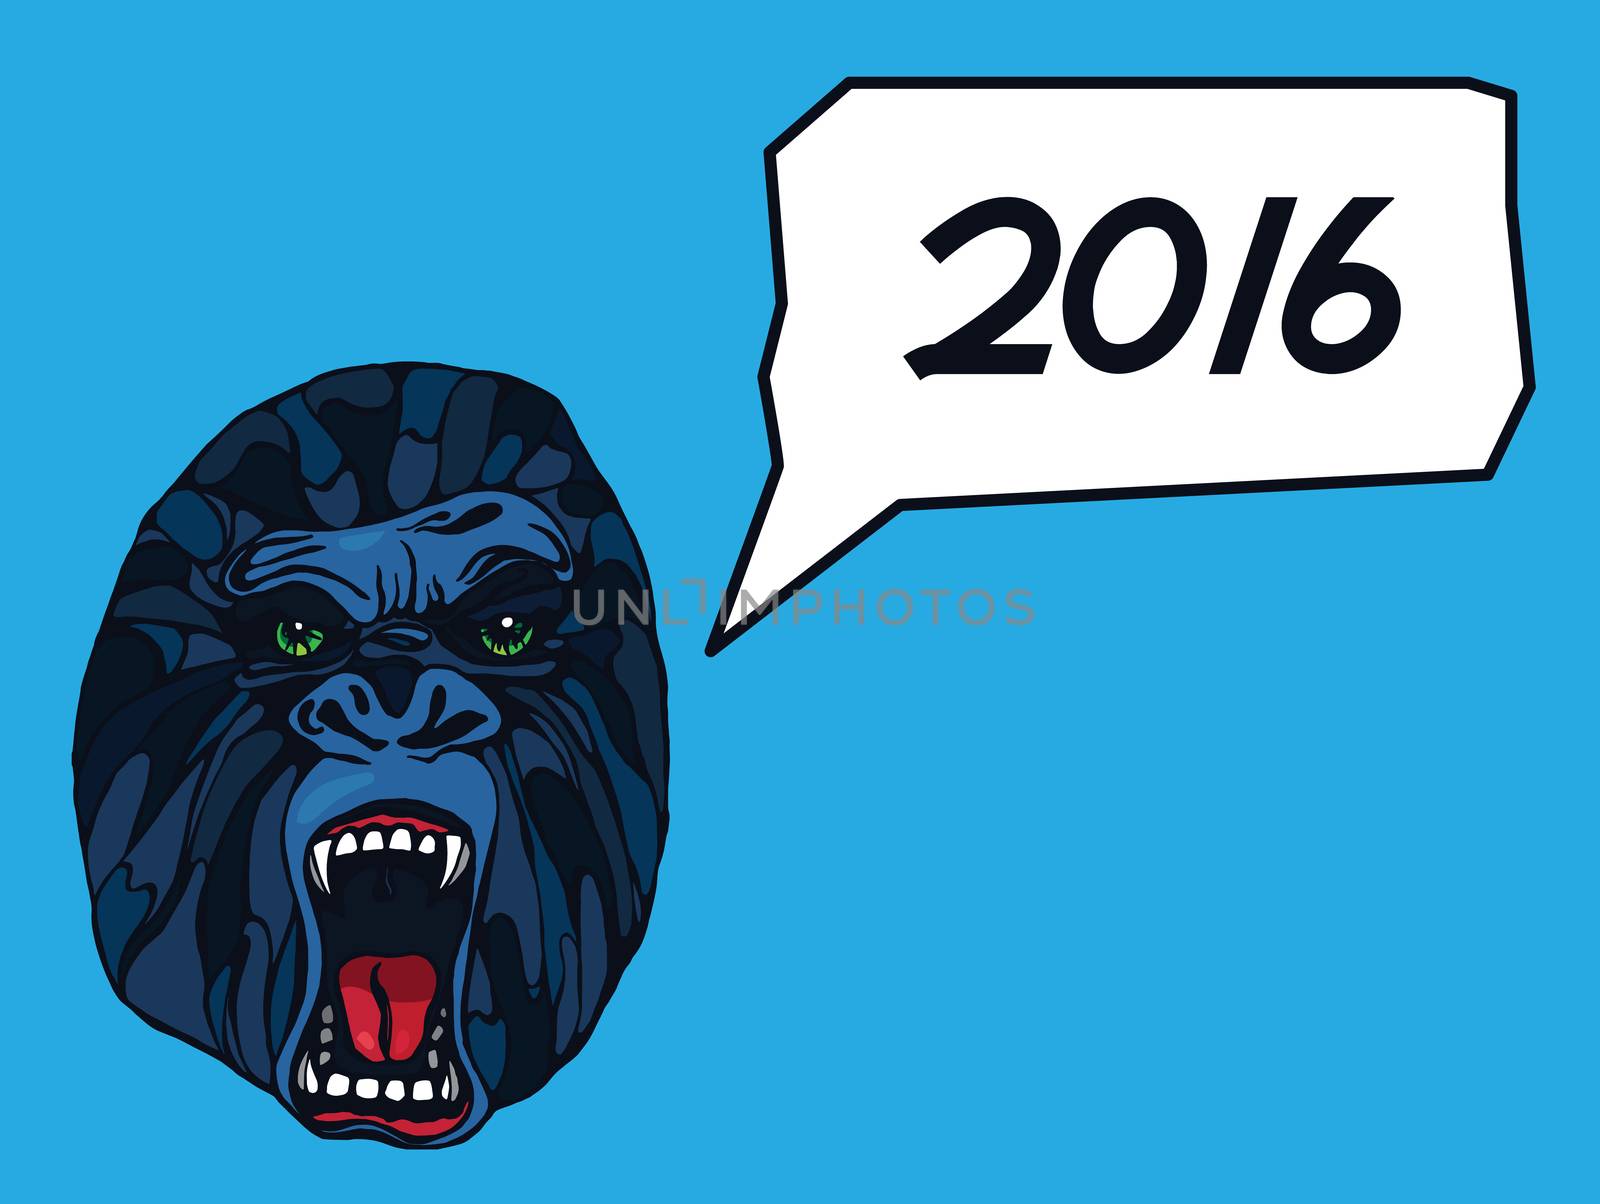 Growling detailed gorilla with text bubble for new 2016 year. Design for t-shirt, poster, bag. Vector